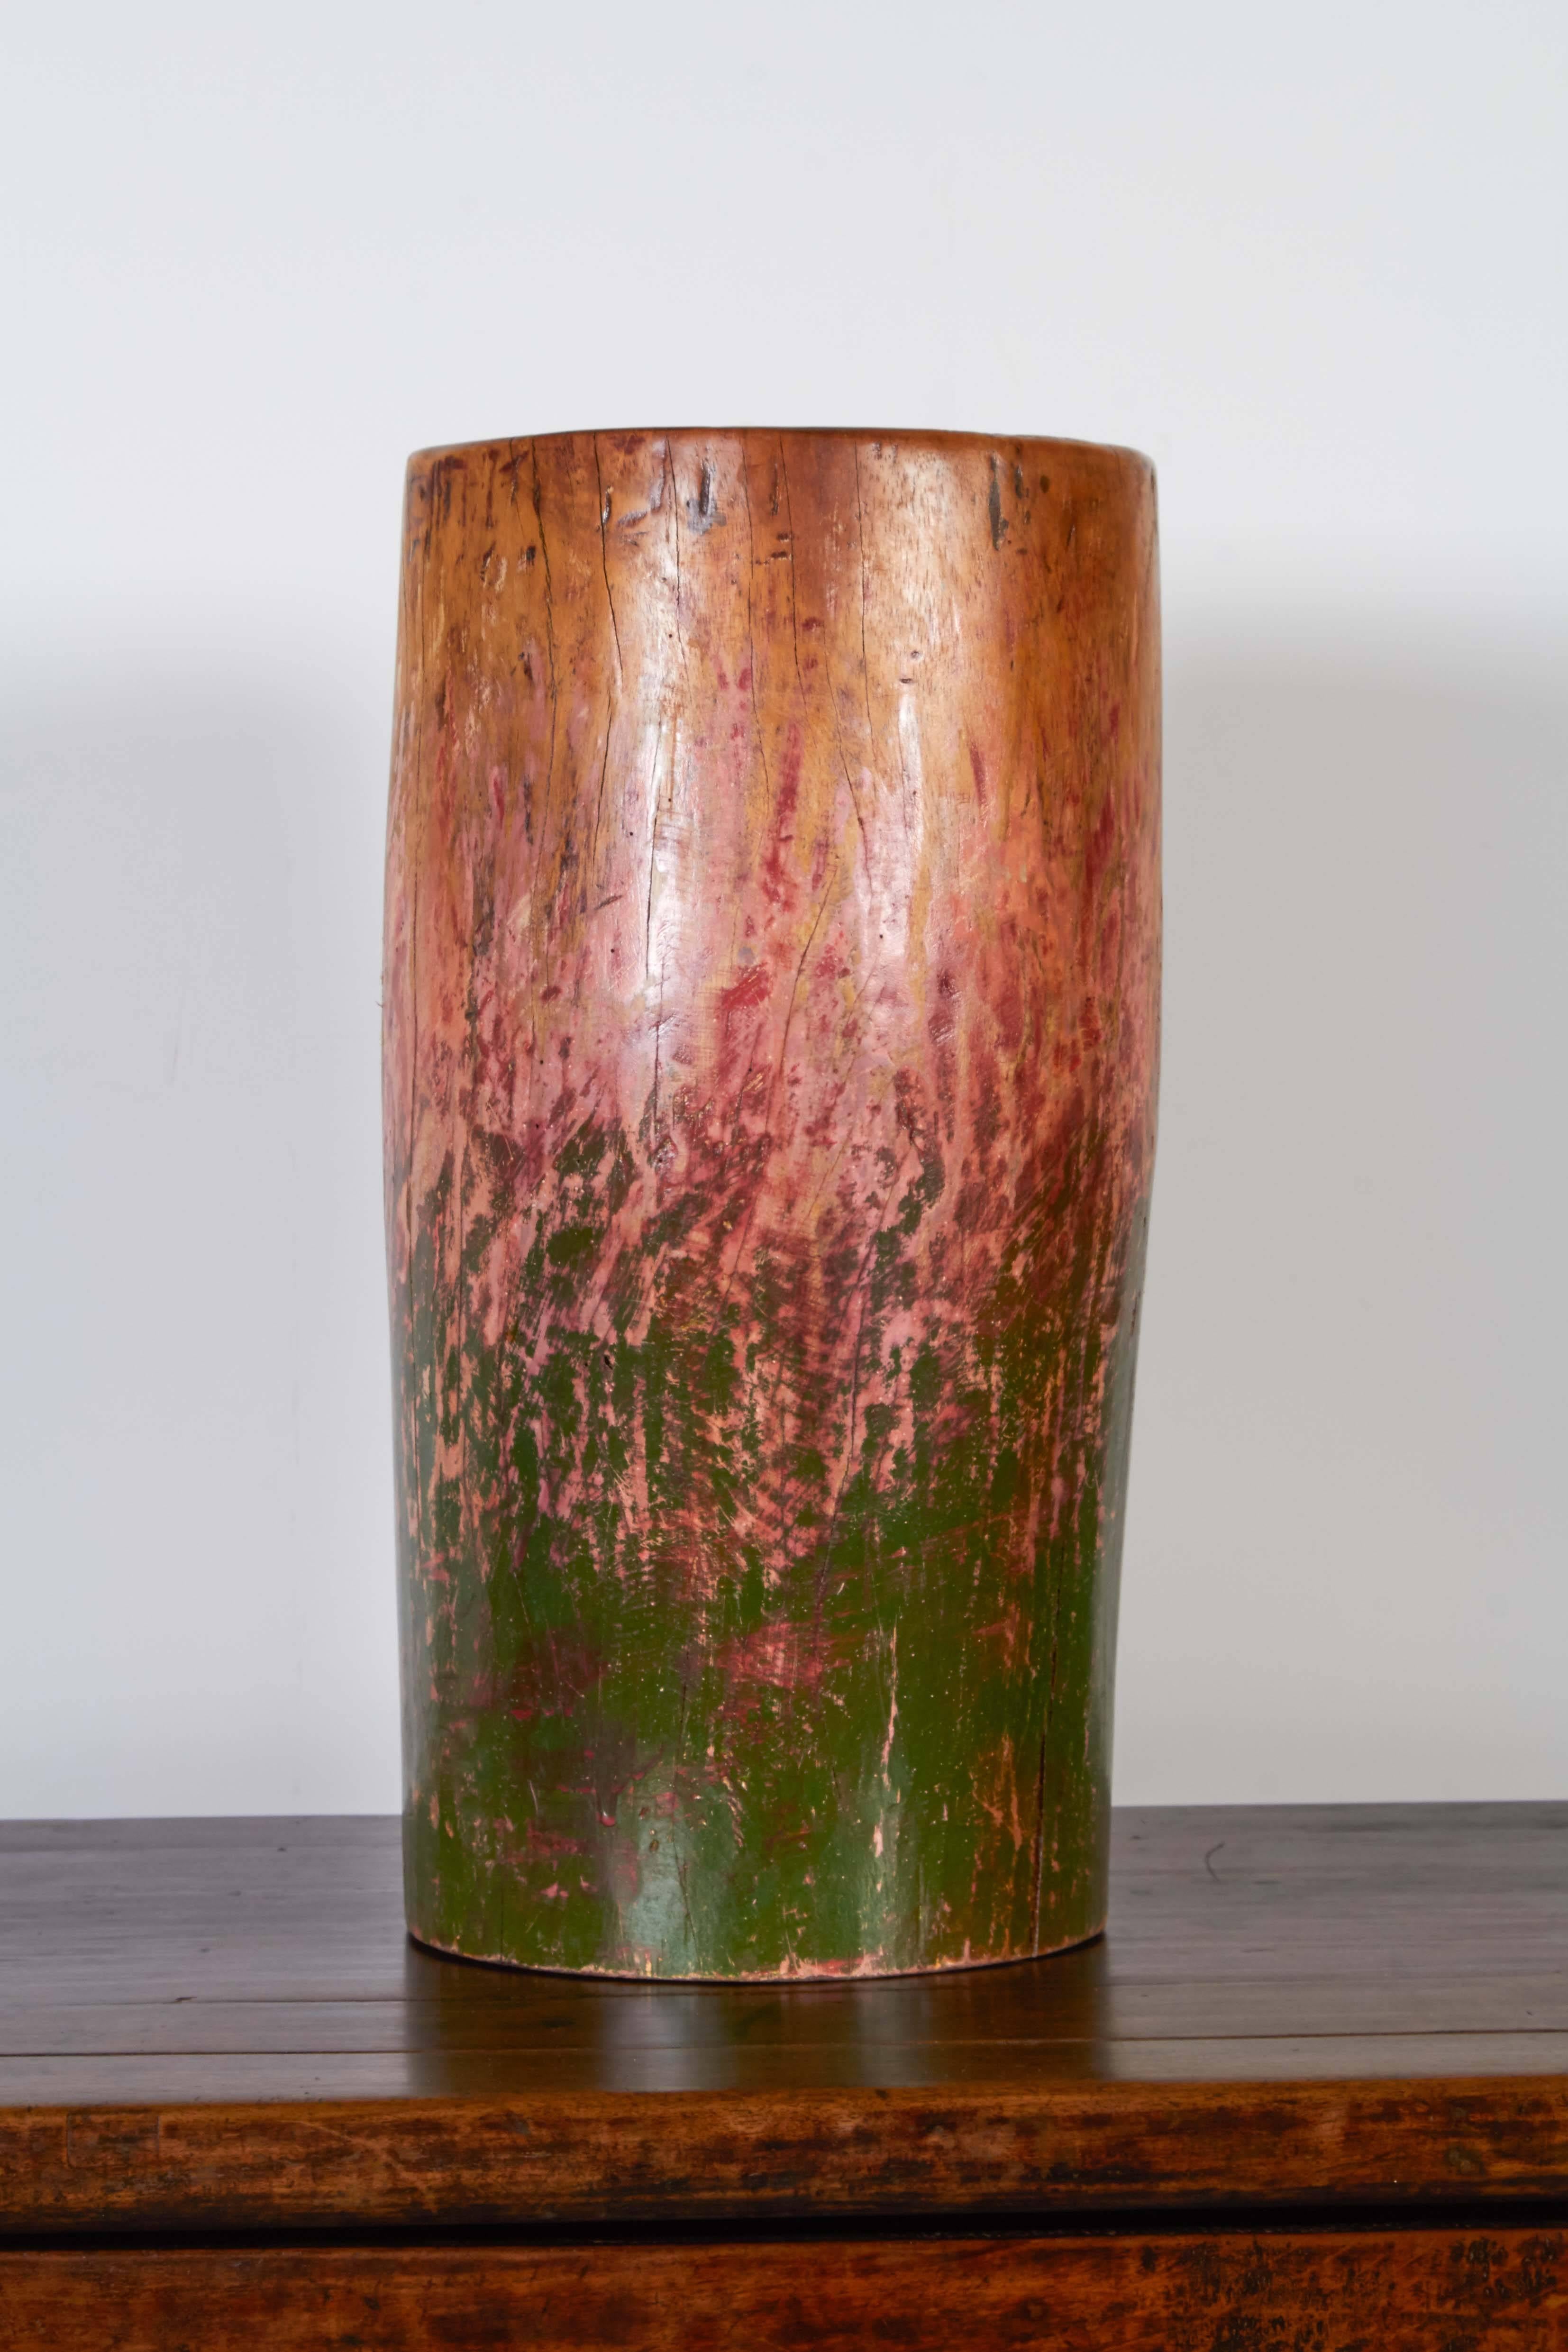 Gracefully shaped and warmly colored vase made from vintage drum base carved from a single piece of teakwood. From Java, Indonesia, circa 1920.
M2016.